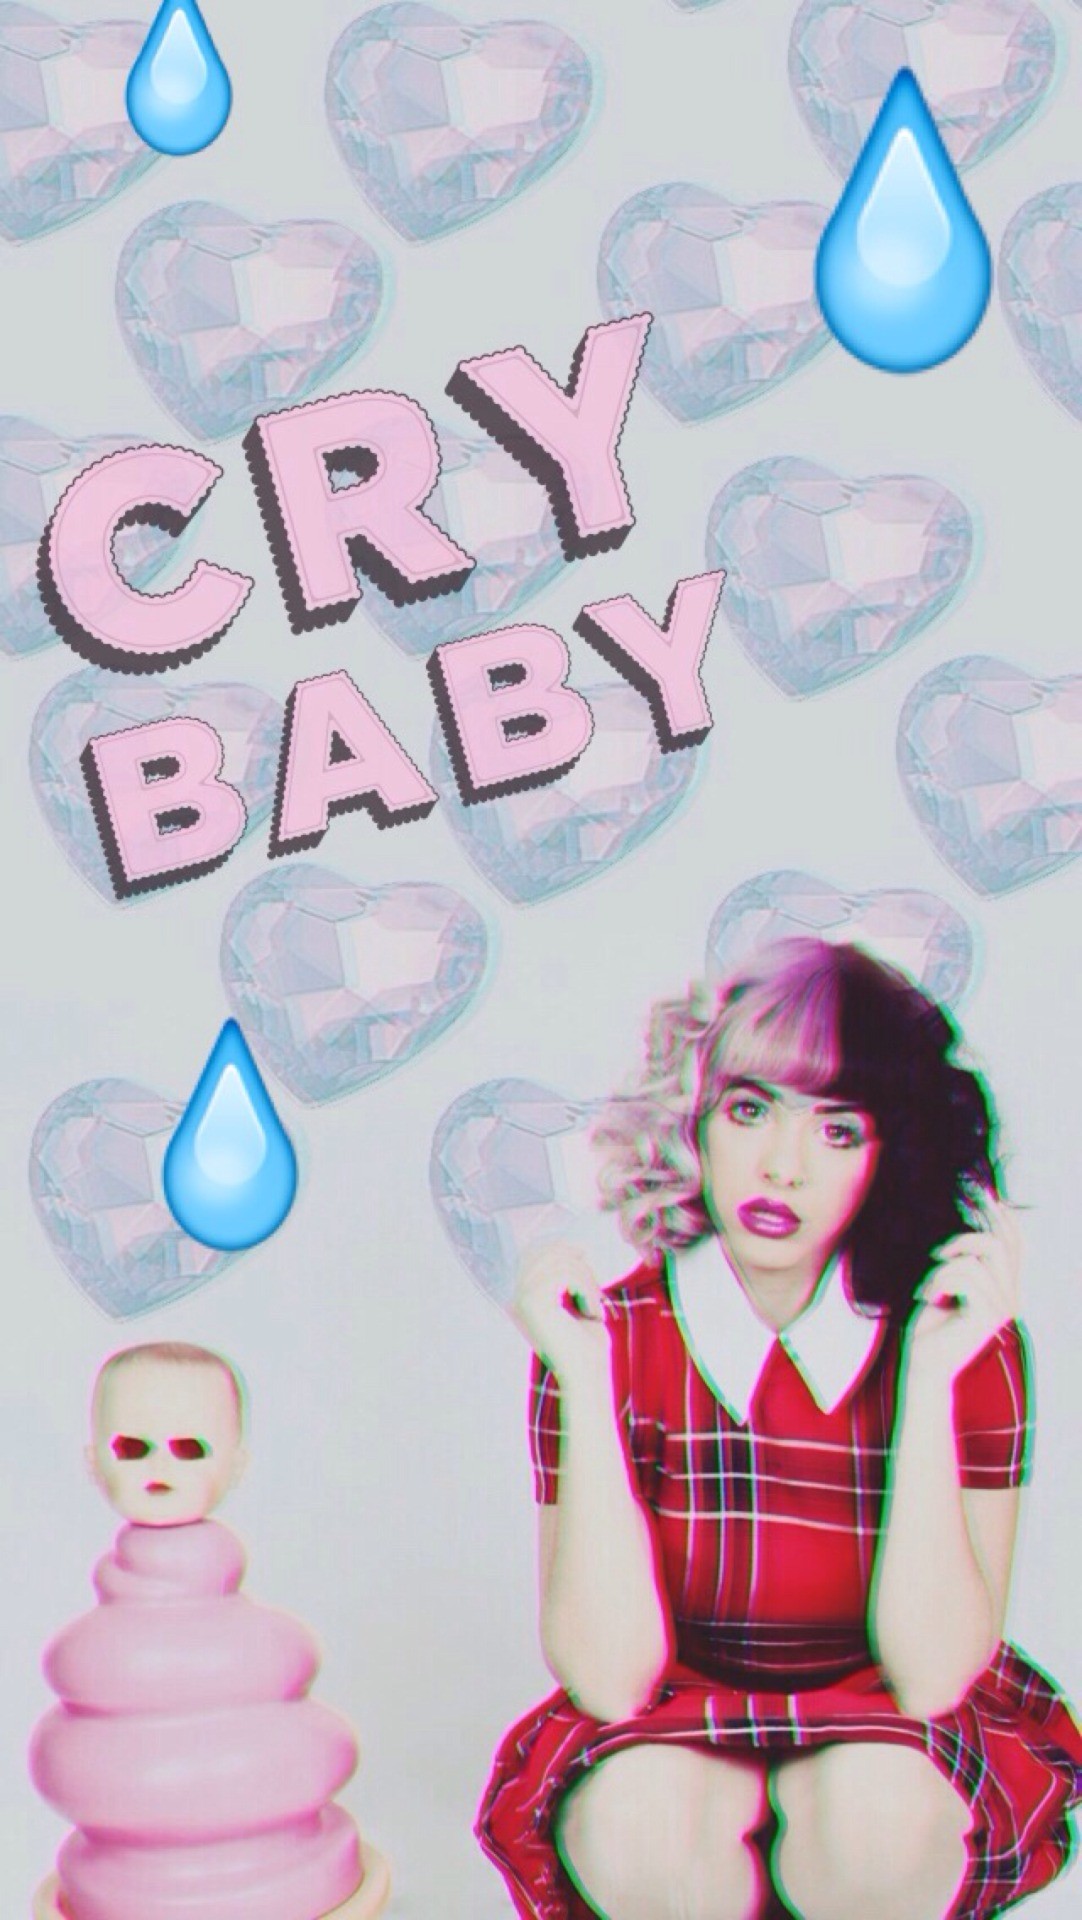 2015 08 19 1439957835 9829303 - Cry Baby Melanie Martinez , HD Wallpaper & Backgrounds